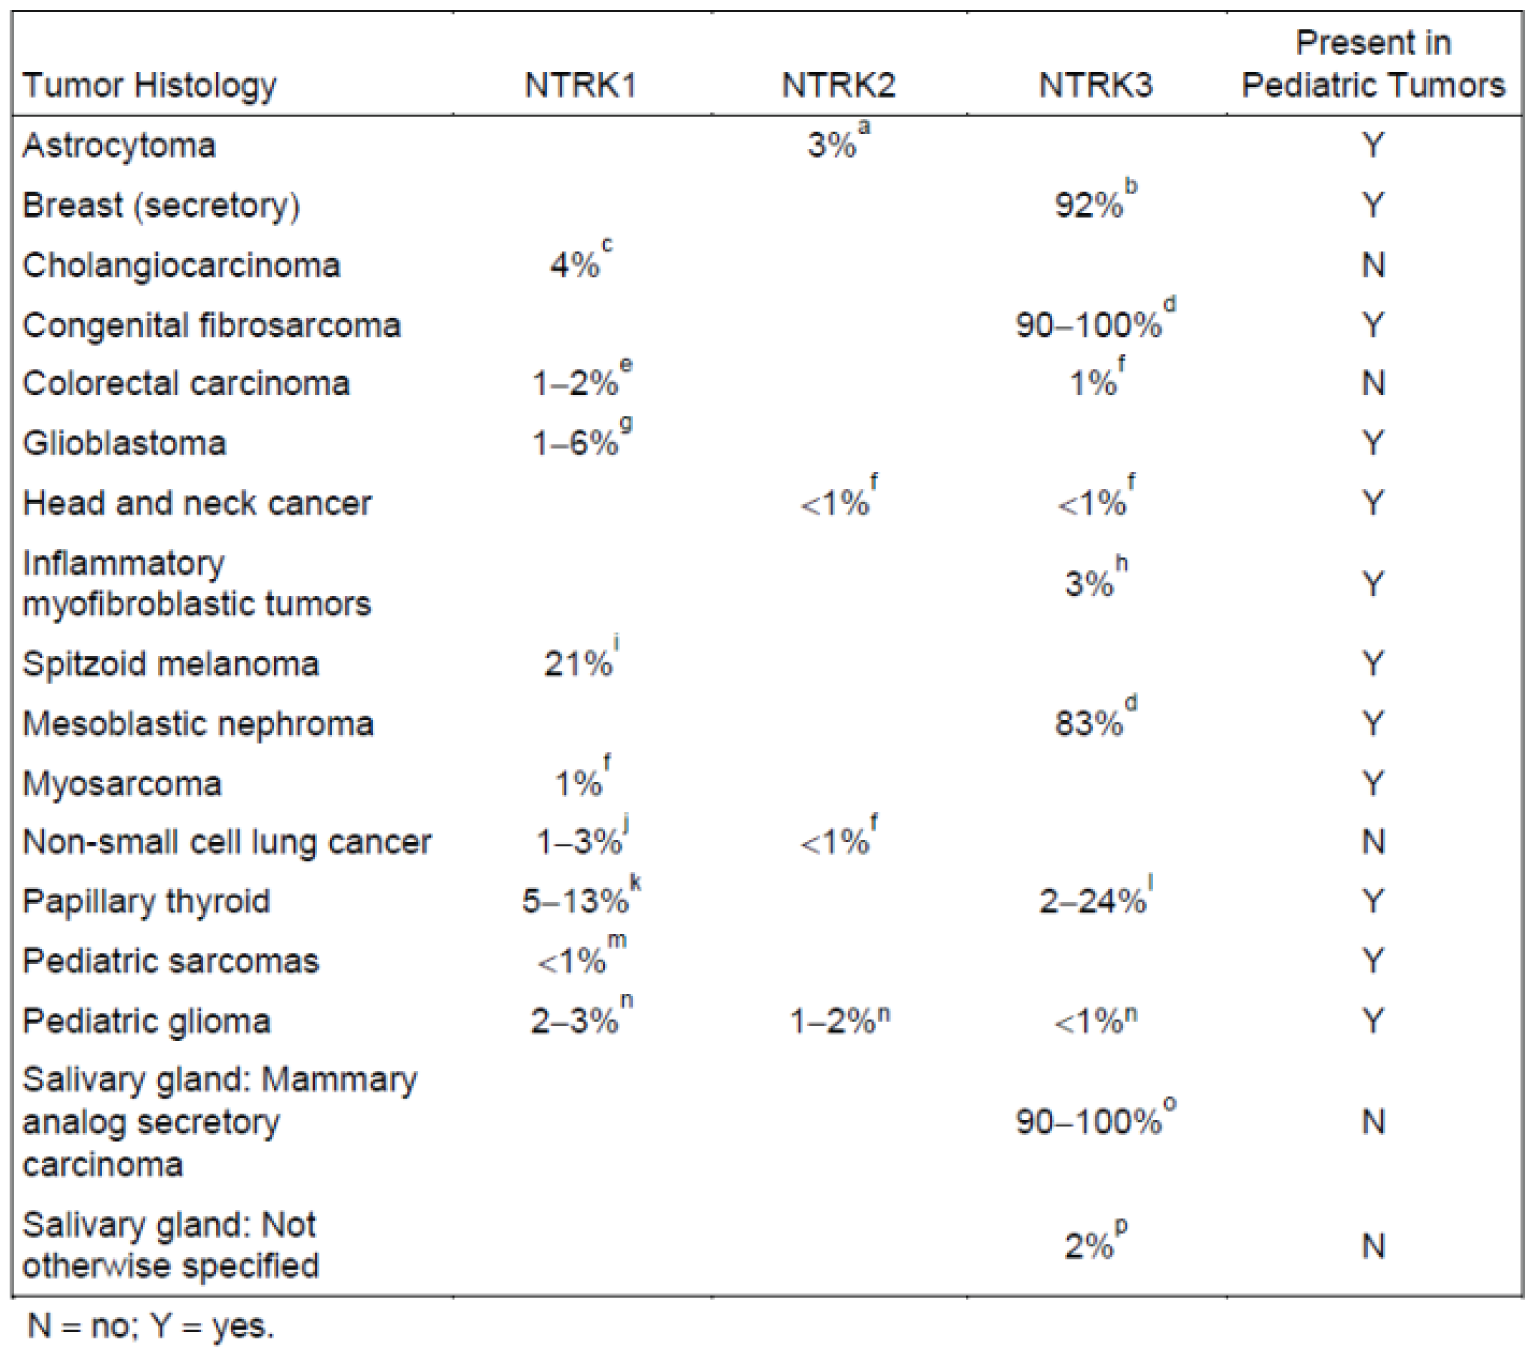 Figure shows the included of NTRK gene fusions across multiple solid tumour histologies